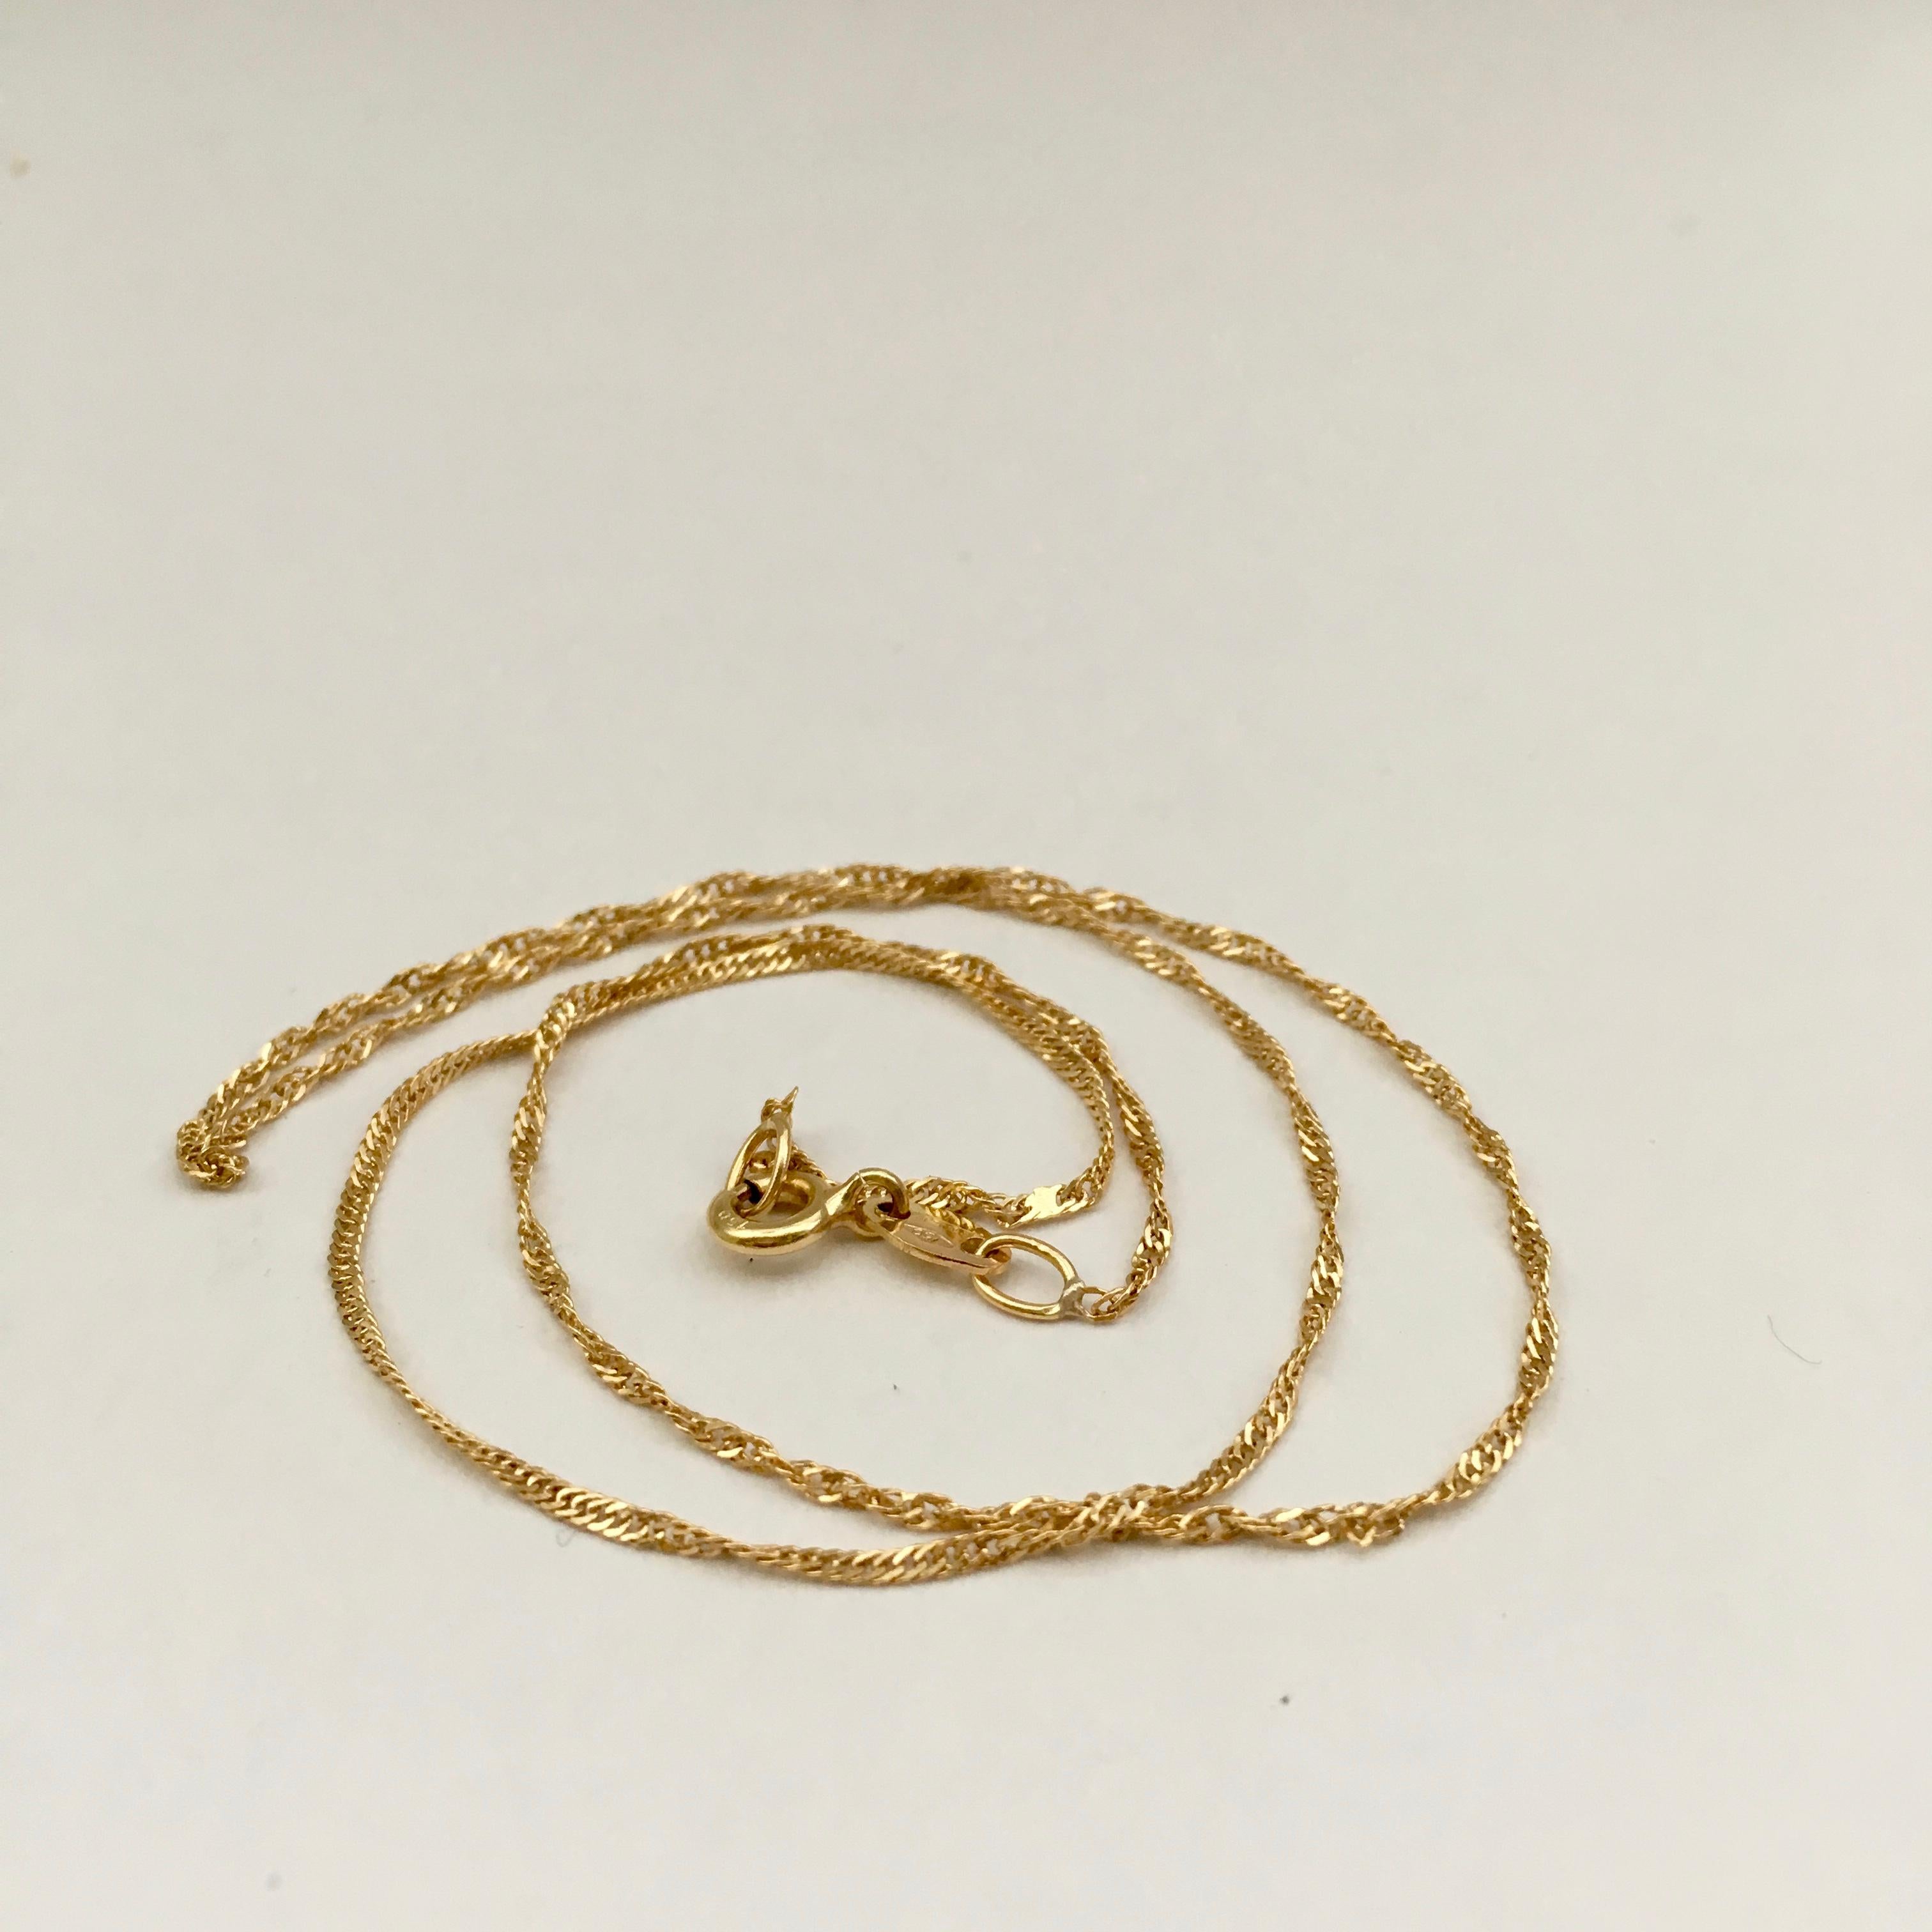 Vintage 18 Karat Gold Chain Bright Yellow Gold Fine Twisted Necklace 3